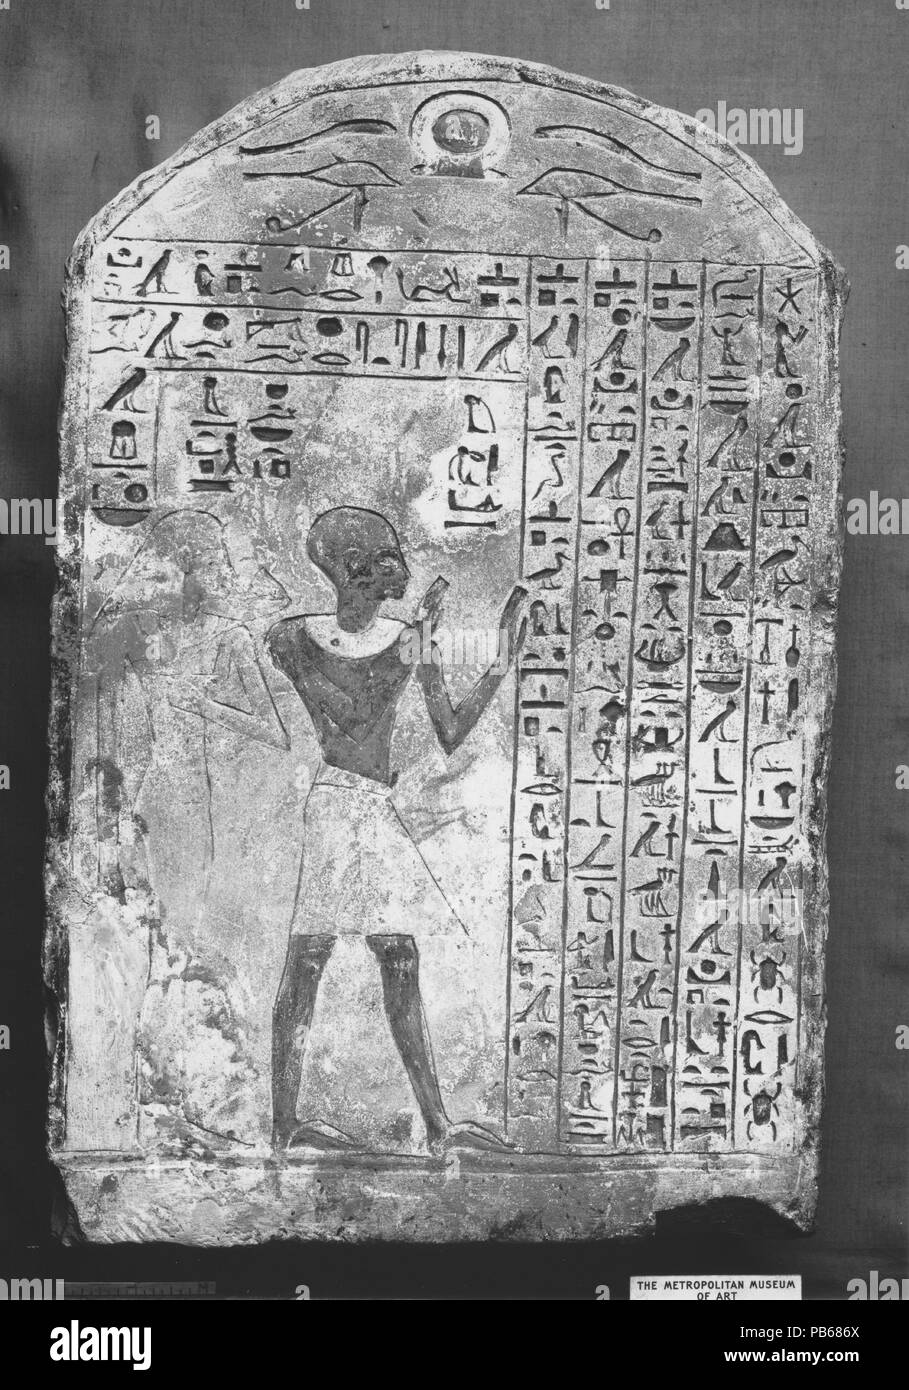 Stela of Ameny and his Wife Inethapy. Dimensions: H. 42.5 cm (16 3/4 in); w. 27.5 cm (10 13/16 in). Dynasty: Dynasty 18. Reign: reign of Thutmose I-Amenhotep II. Date: ca. 1427-1400 B.C..  The wab priest Ameny is shown with upraised arms, a pose of adoration. He is followed by his wife, Inet-Hapy, who holds a lotus flower. The text invokes the gods Re-Horakhty, Thoth, Atum, and Khepri. Museum: Metropolitan Museum of Art, New York, USA. Stock Photo